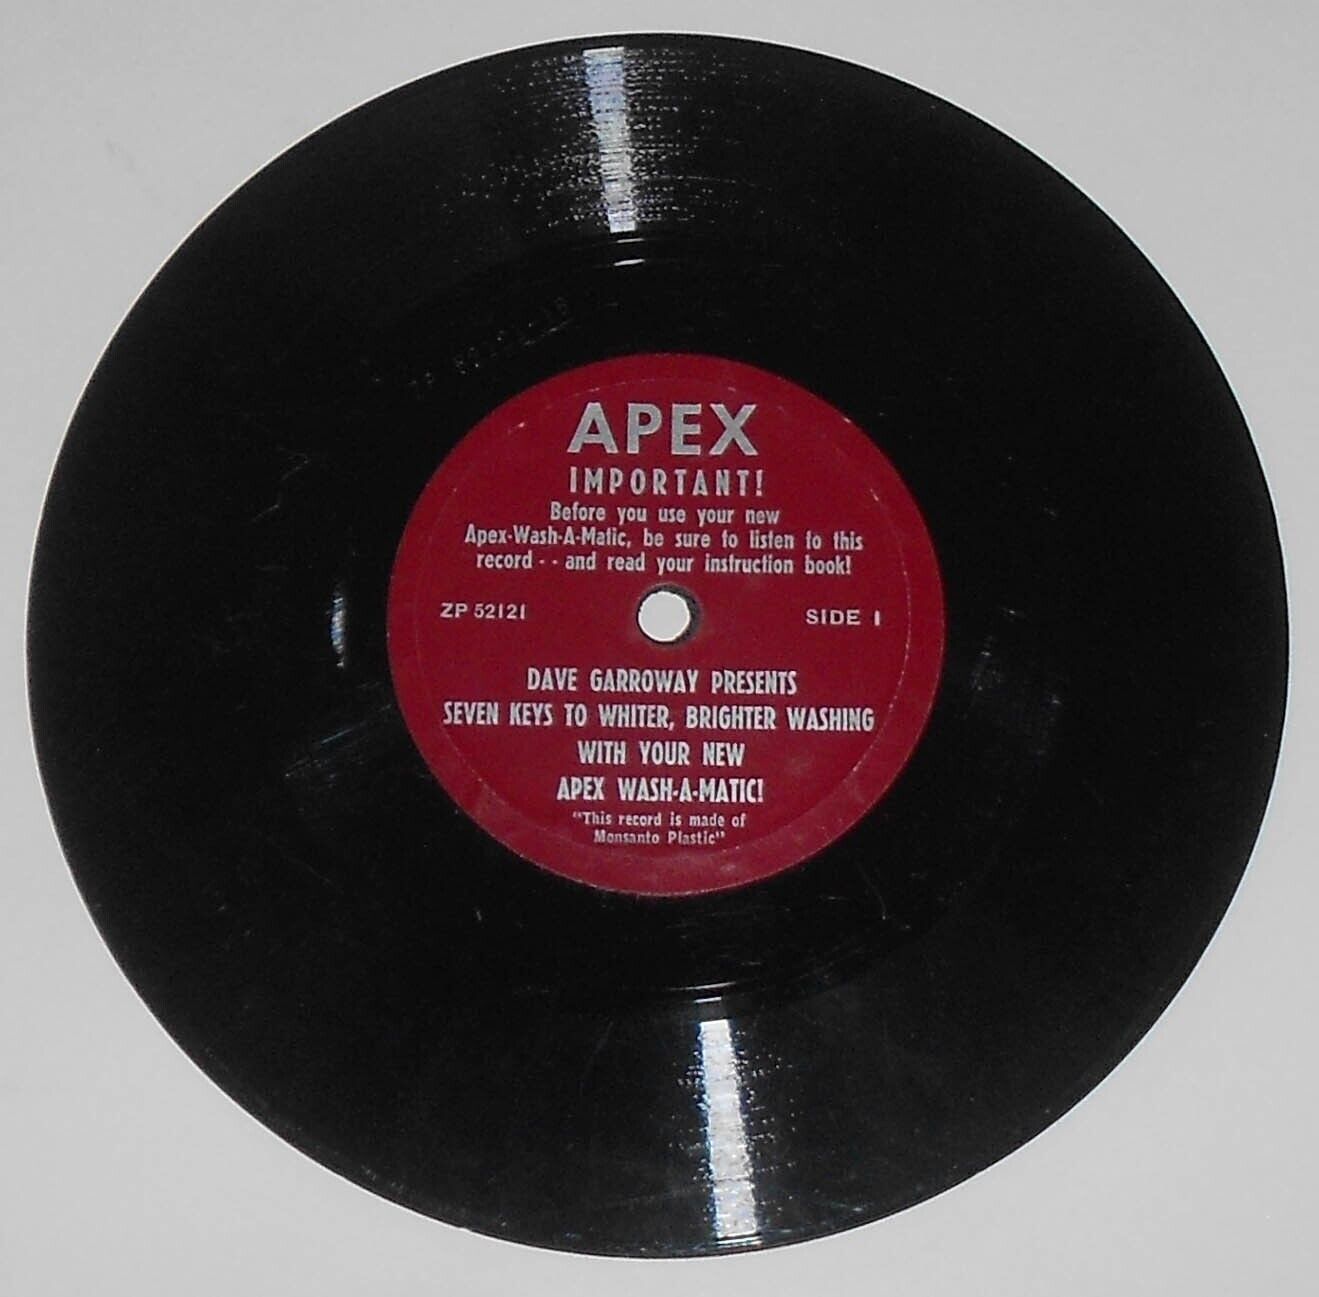 DAVID CARROWAY Presents Your New APEX WASH-A-MATIC 78 RPM Record 1953 - TESTED